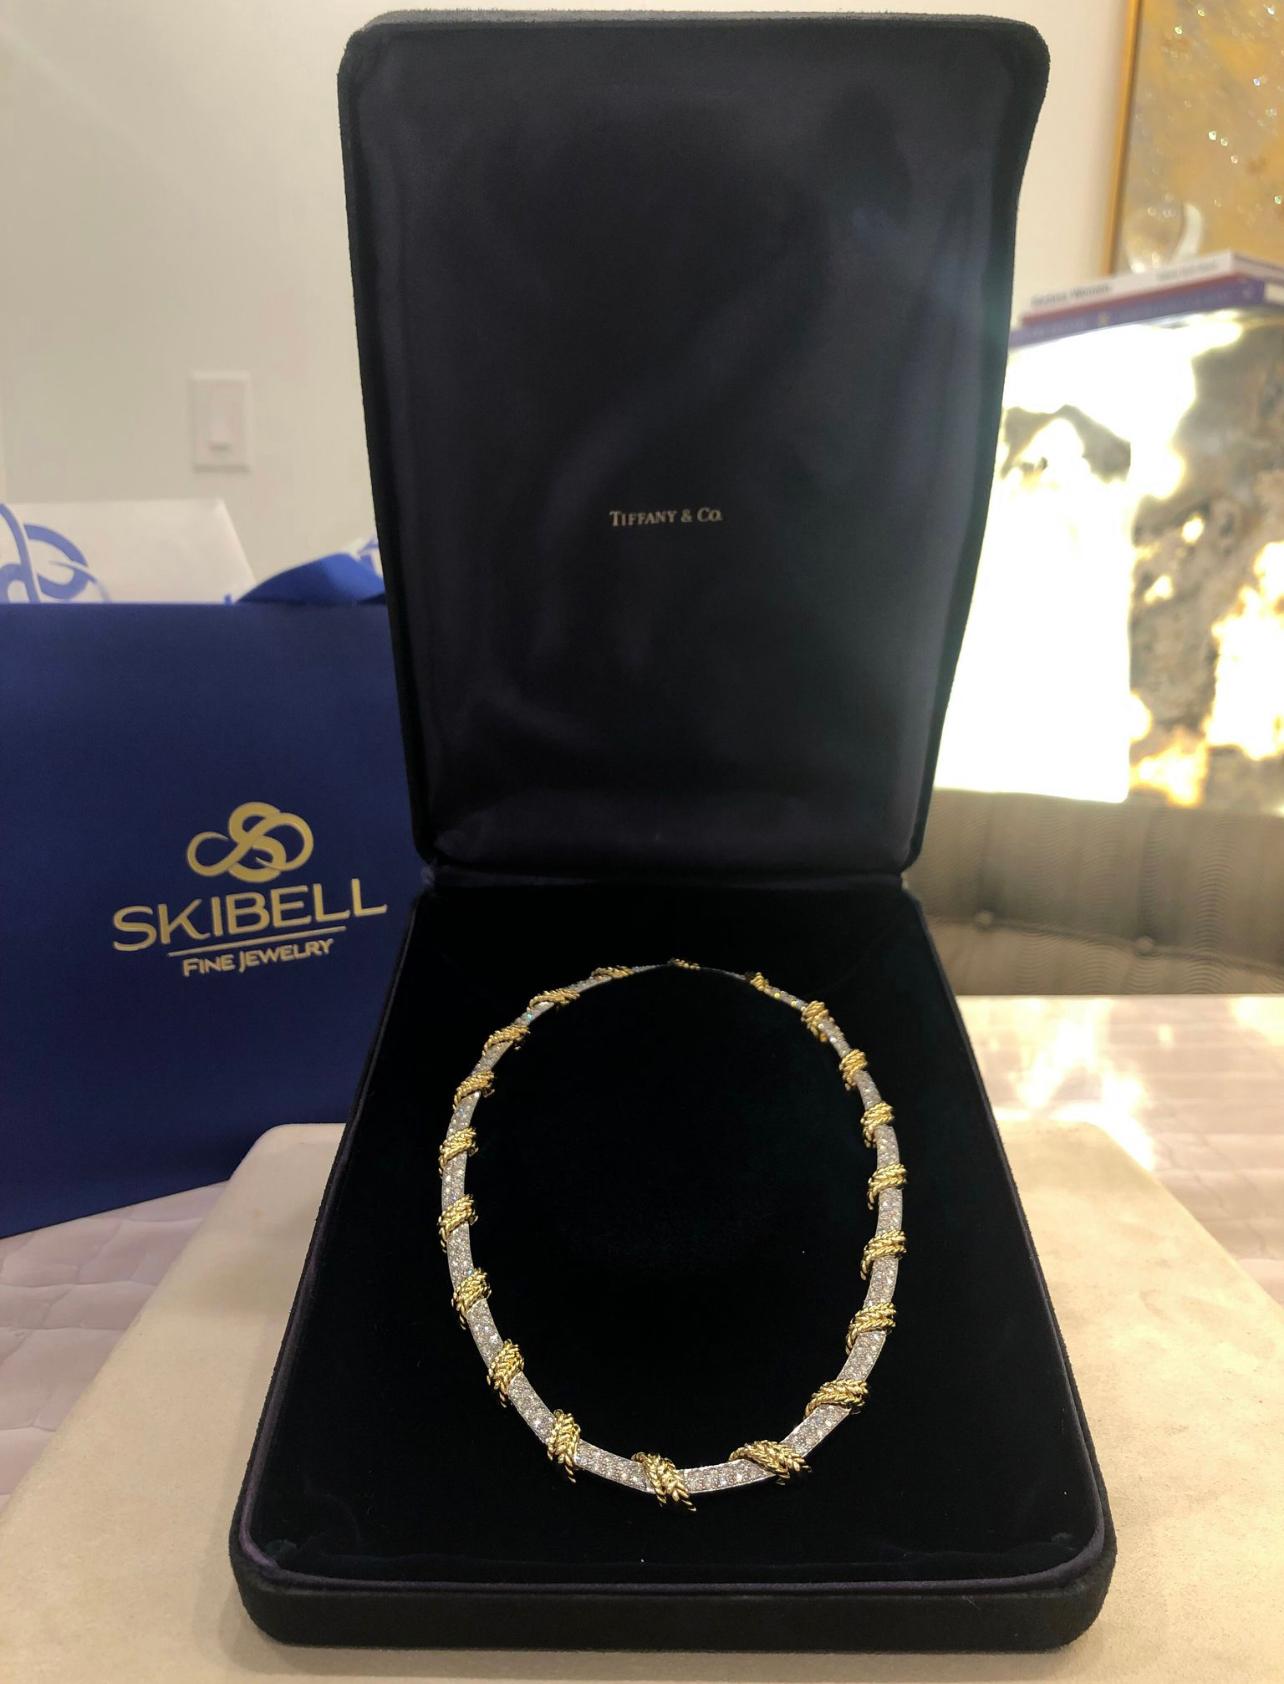 Estate Tiffany & Co. Diamond Necklace in Platinum Topped 18K Yellow Gold. The necklace features 15ctw of brilliant round diamonds, E-F color, VVS clarity. Modern piece that is rare and collectible due to the process of how it is crafted. The